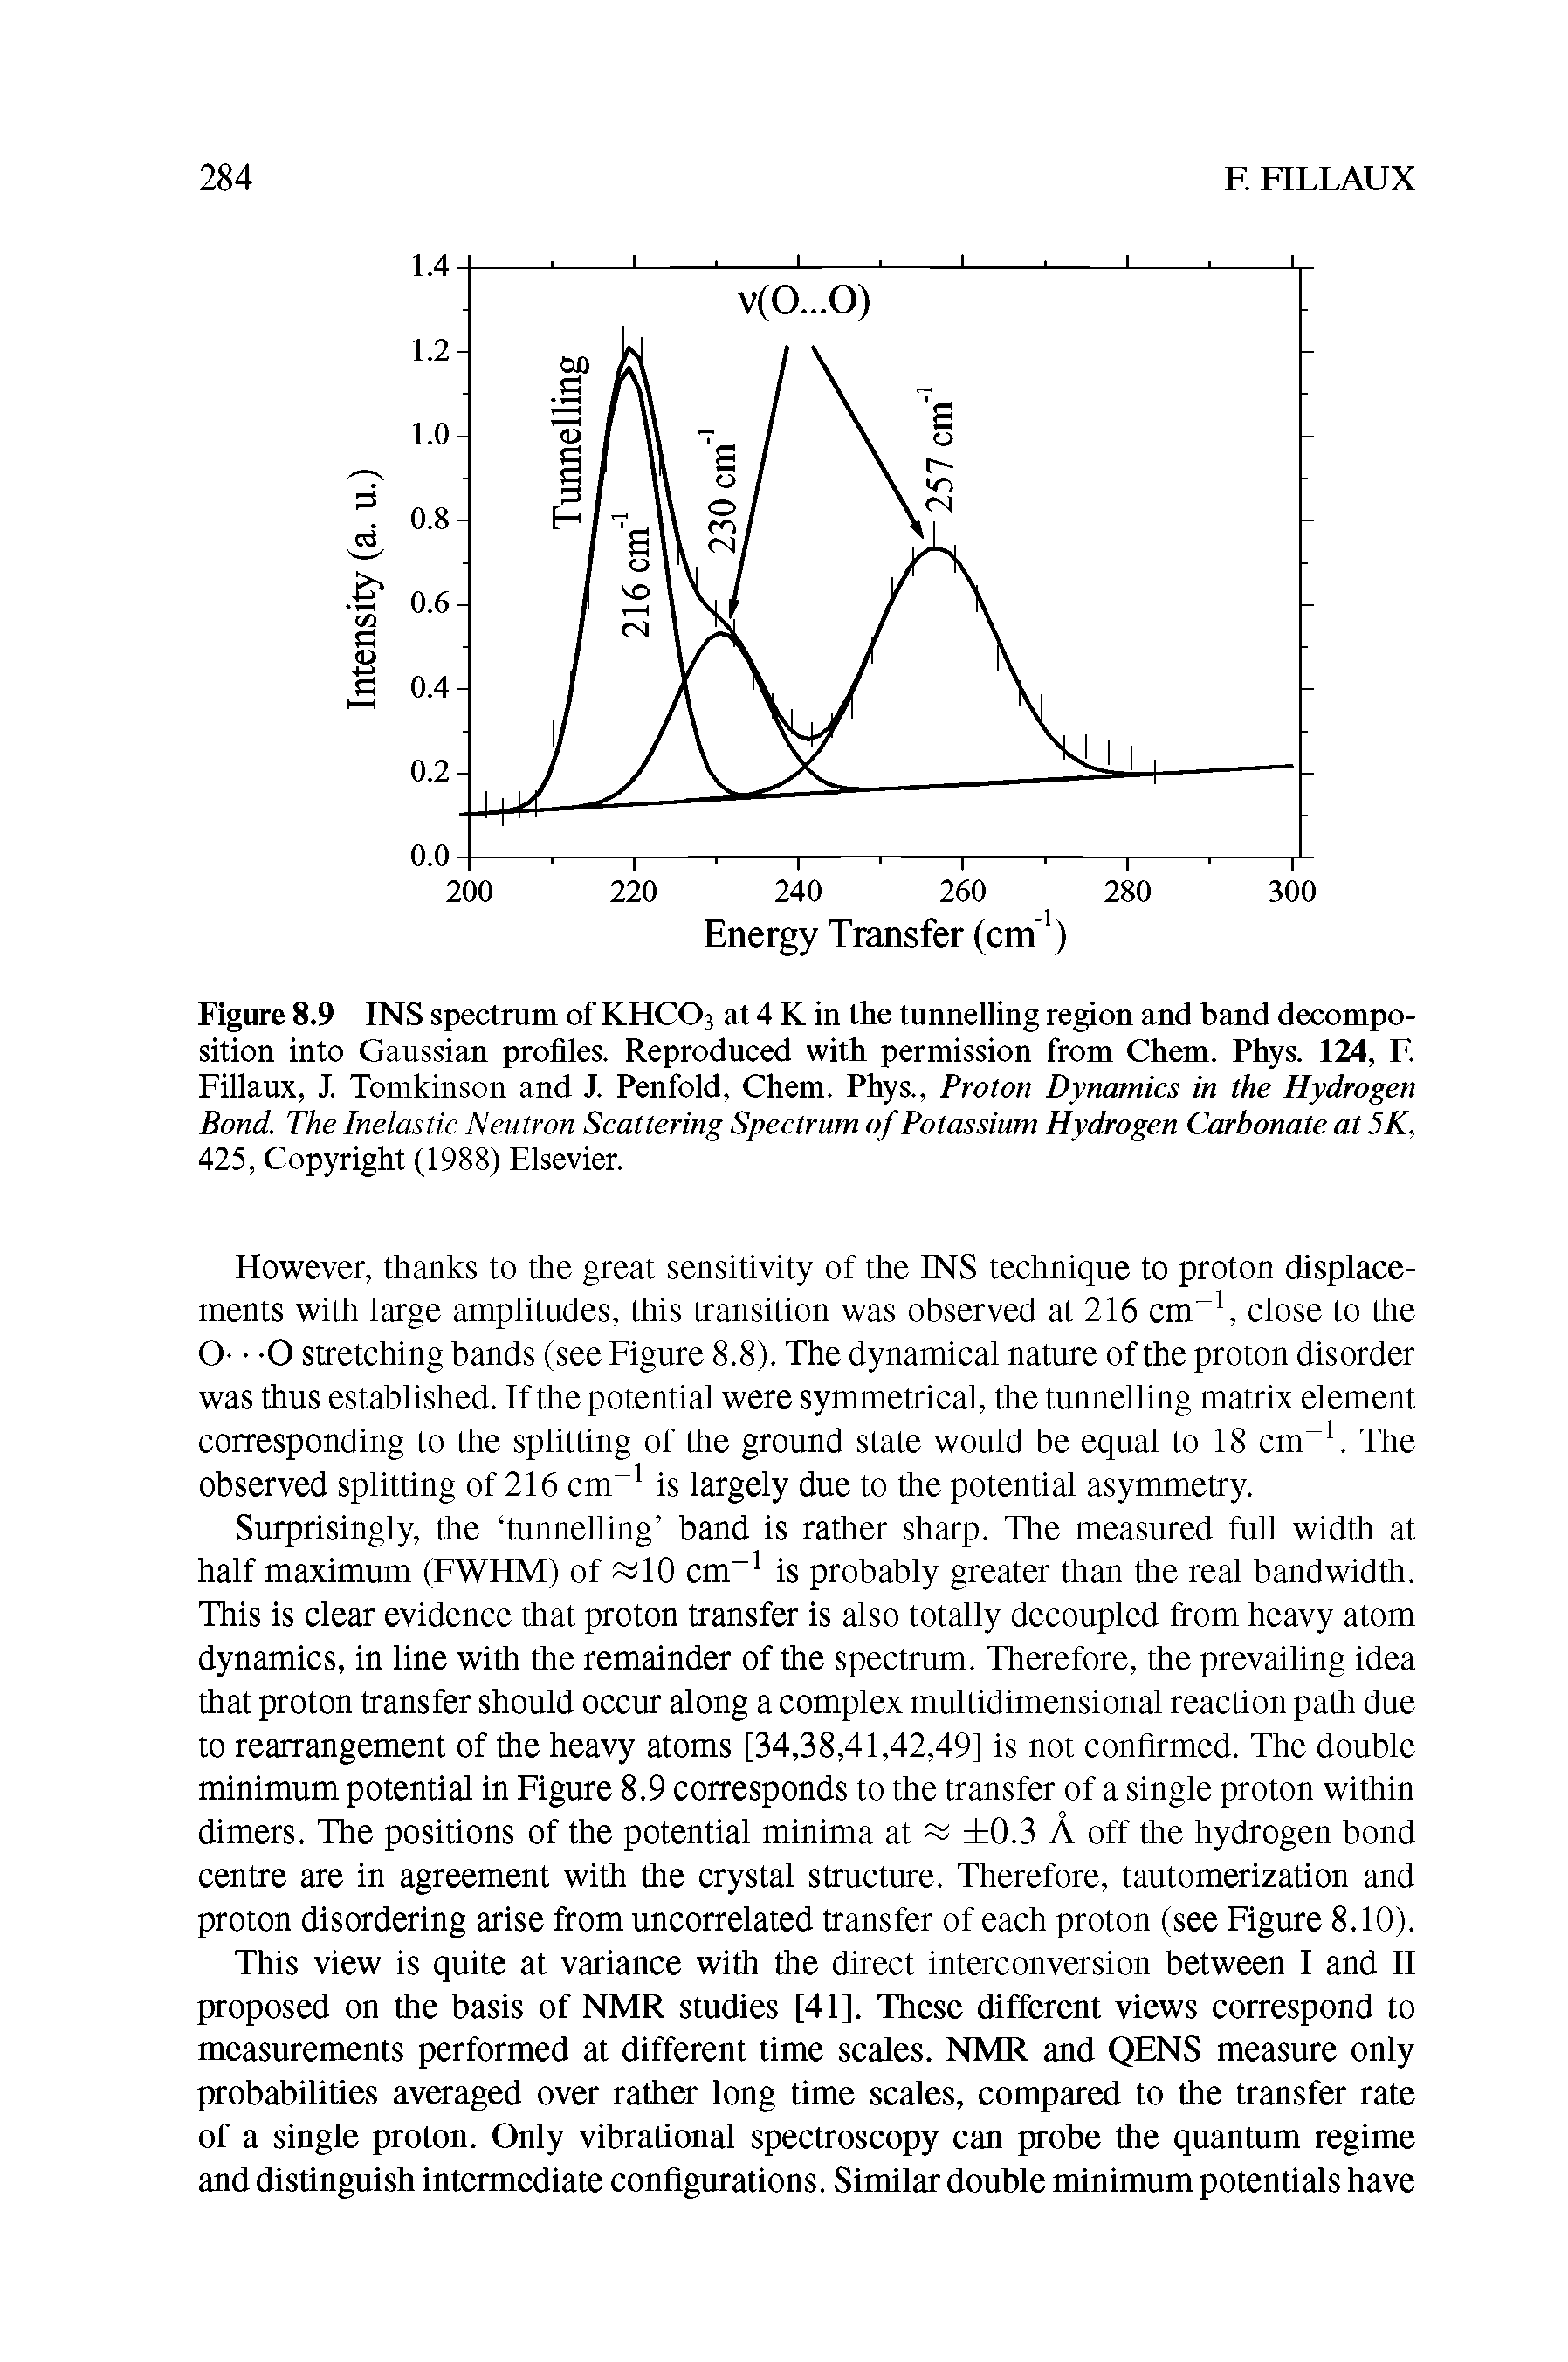 Figure 8.9 INS spectrum of KHCOj at 4 K in the tunnelling region and band decomposition into Gaussian profiles. Reproduced with permission from Chem. Phys. 124, F. Fillaux, J. Tomkinson and J. Penfold, Chem. Phys., Proton Dynamics in the Hydrogen Bond. The Inelastic Neutron Scattering Spectrum of Potassium Hydrogen Carbonate at 5K, 425, Copyright (1988) Elsevier.